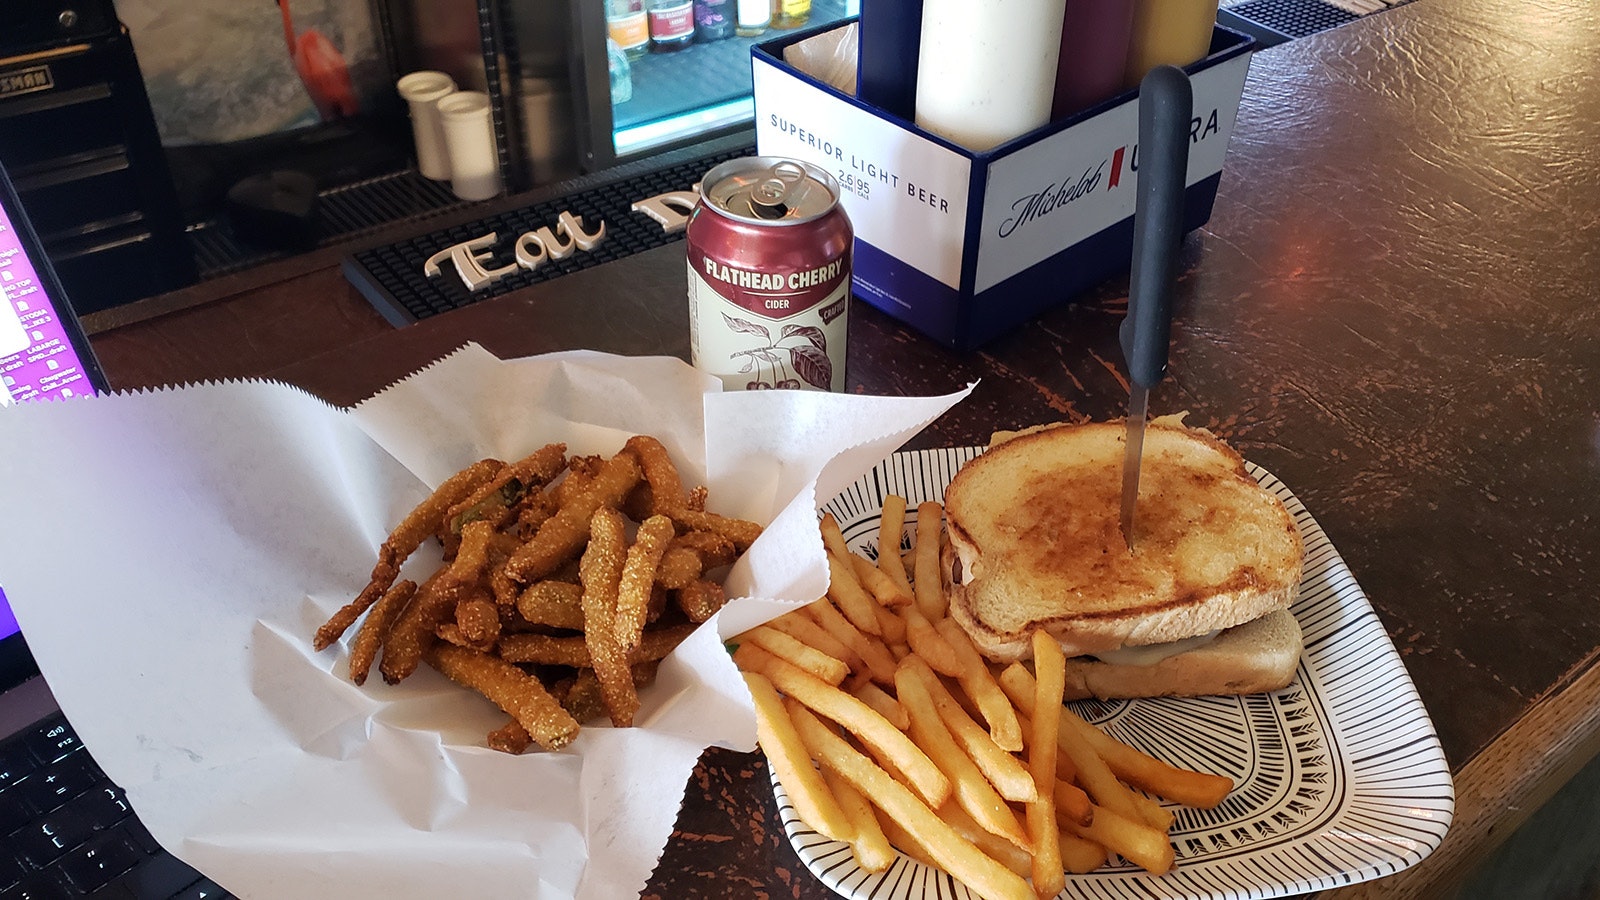 4 Corners Bar serves up jalapenñ popper cheese sandwich with fried pickles and a Flathead Cherry Cider